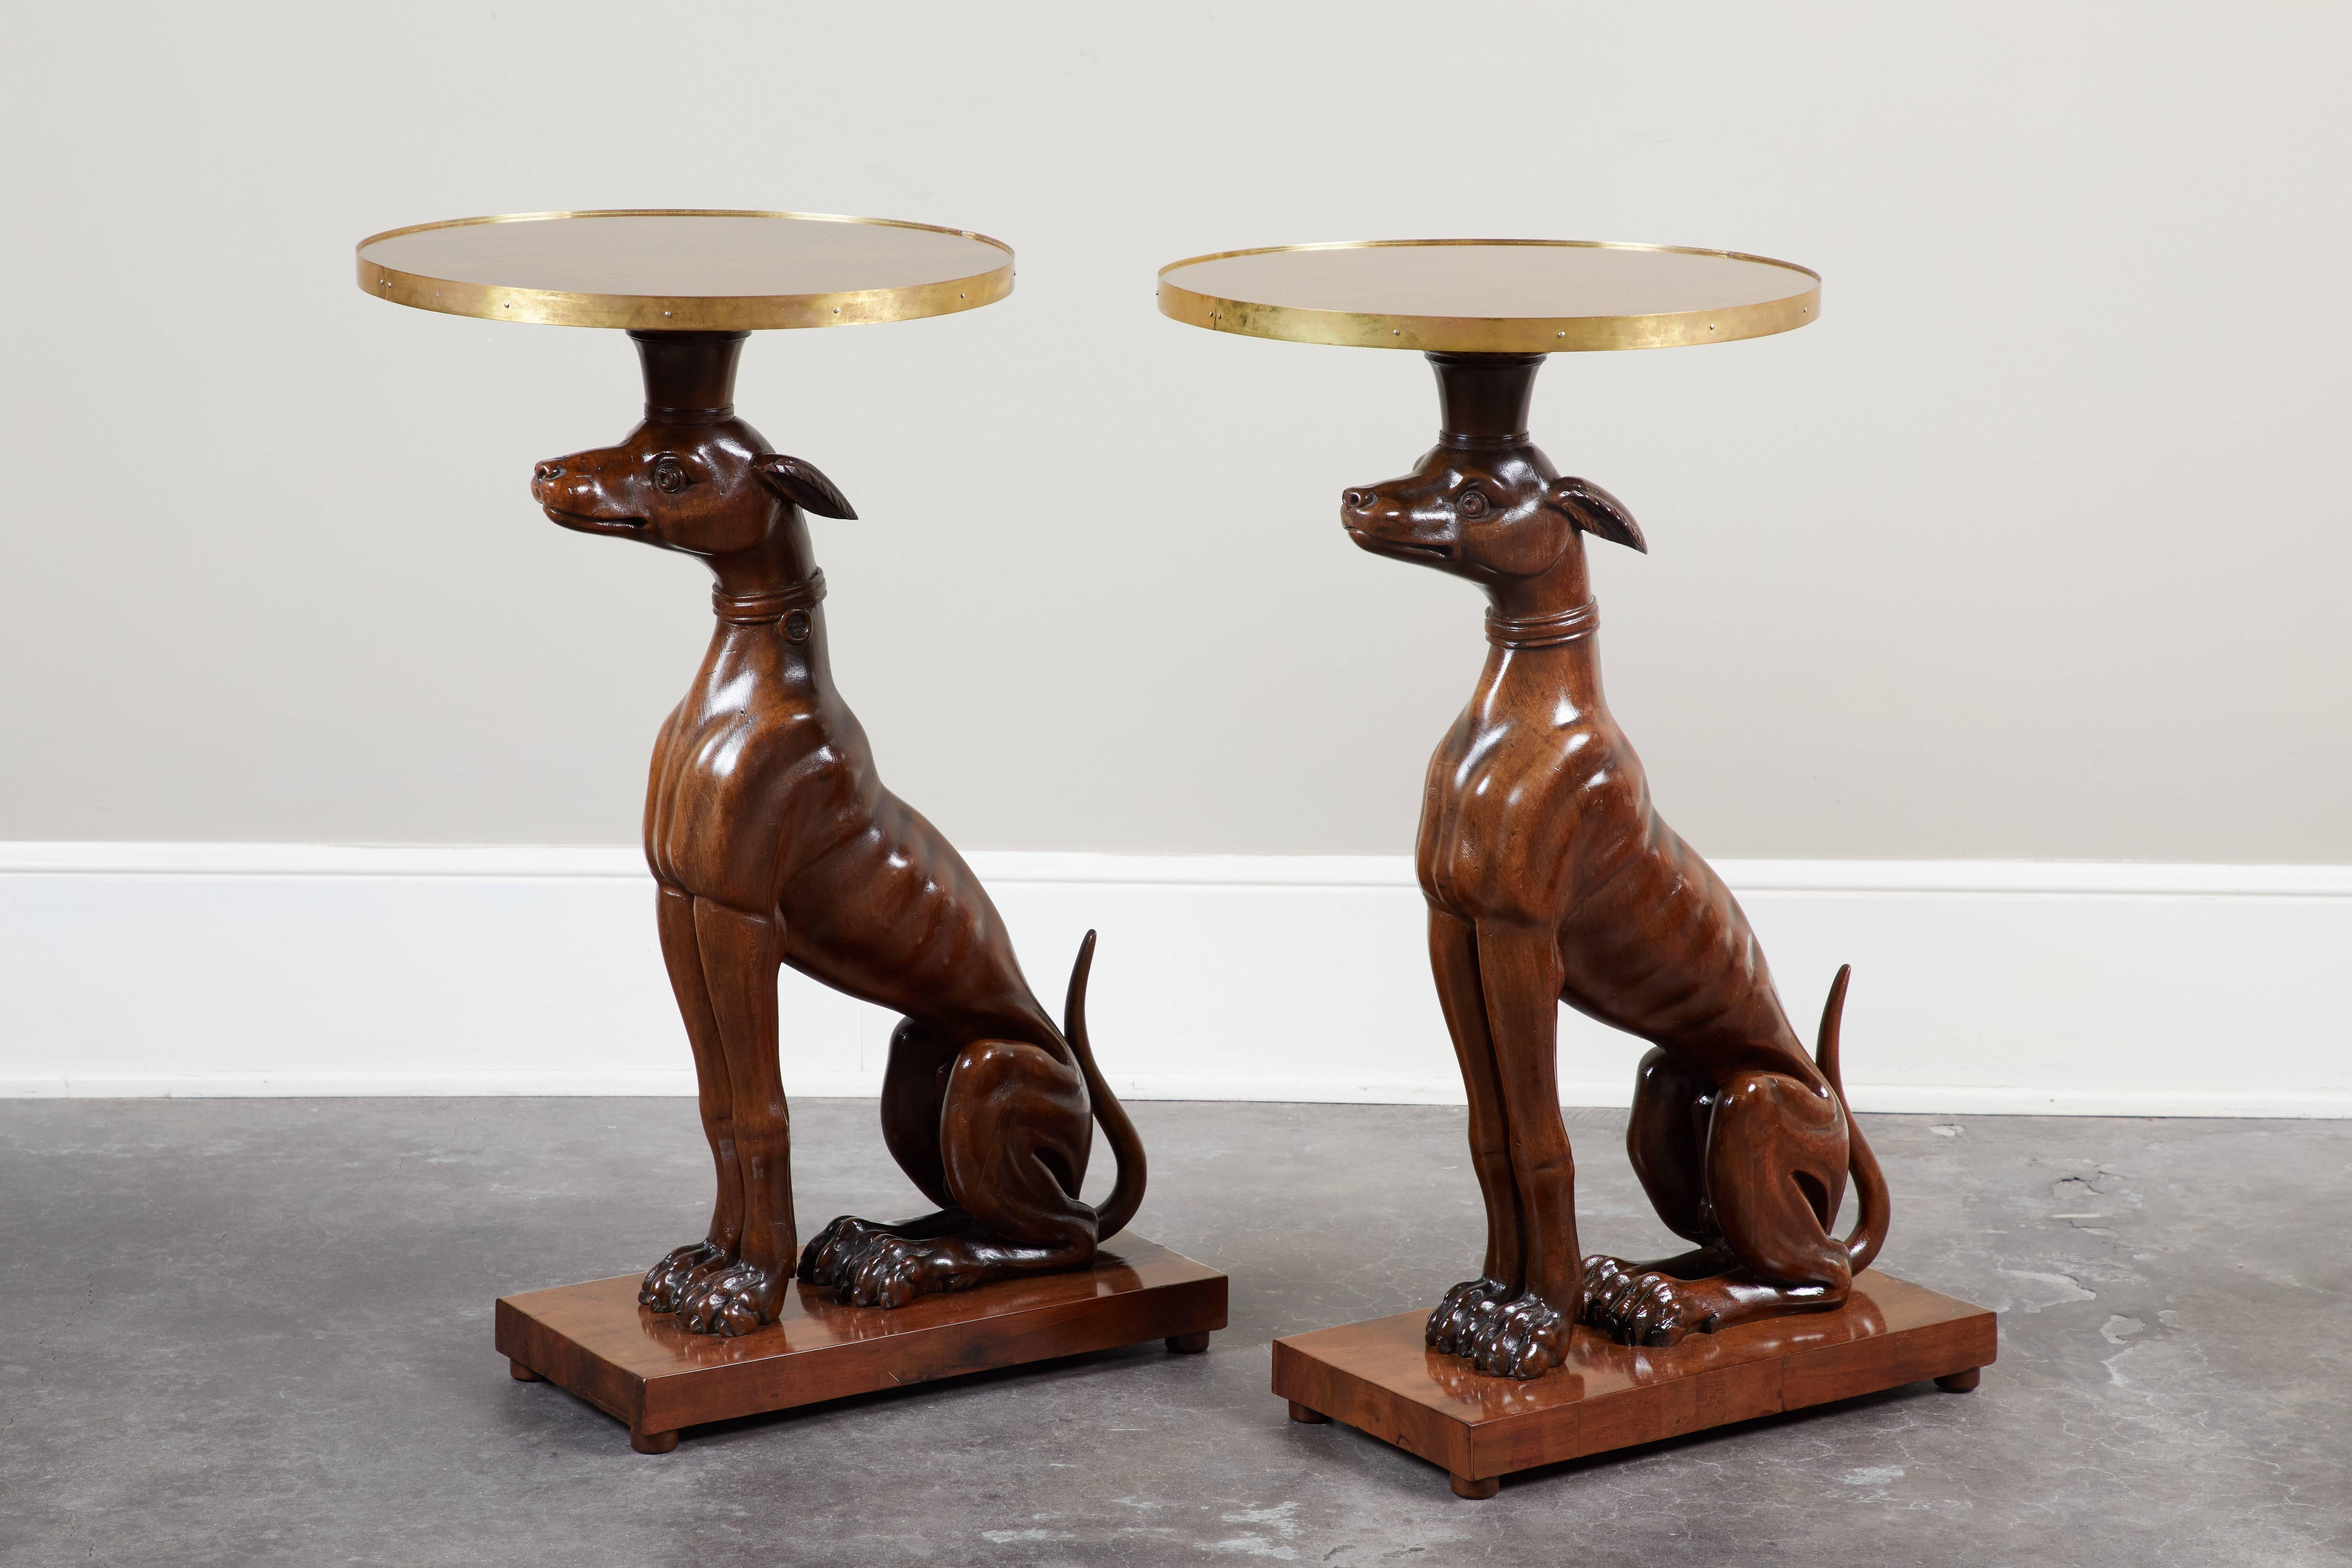 A pair of Italian mahogany greyhound side tables with newer base and top, circa 1840.